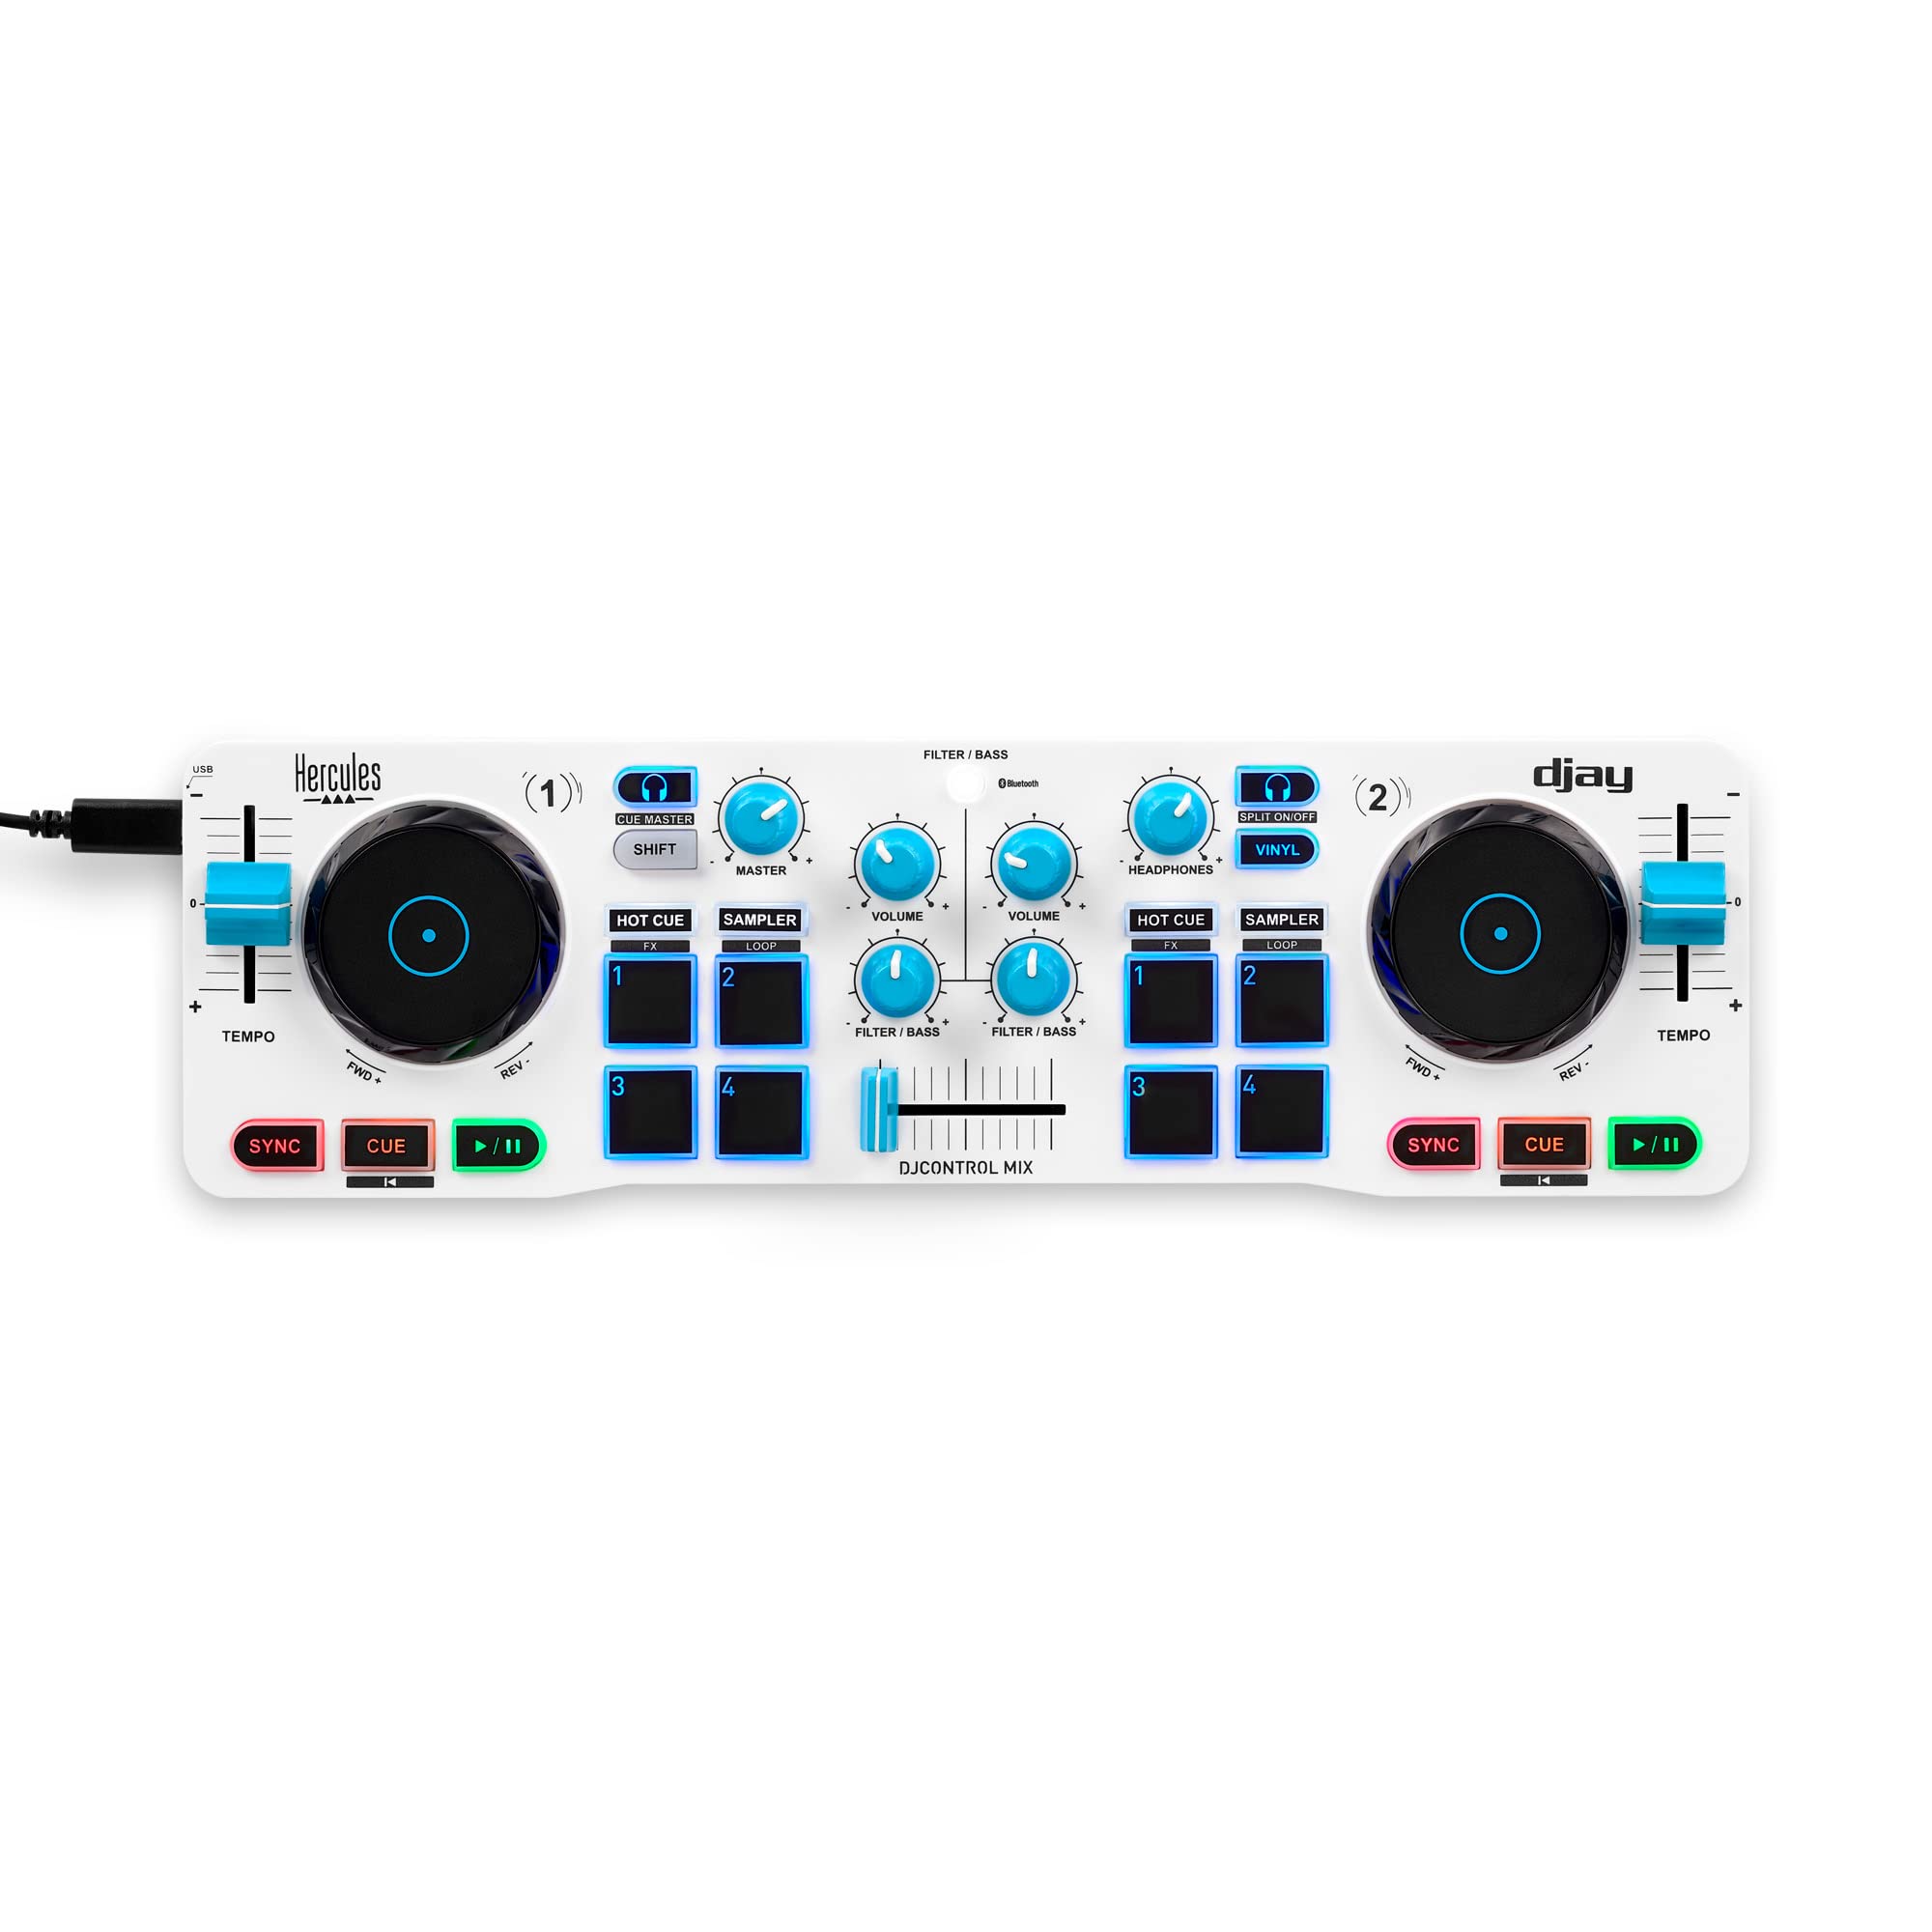 Hercules DJ DJControl Mix 2-channel DJ Controller for iOS and Android Devices